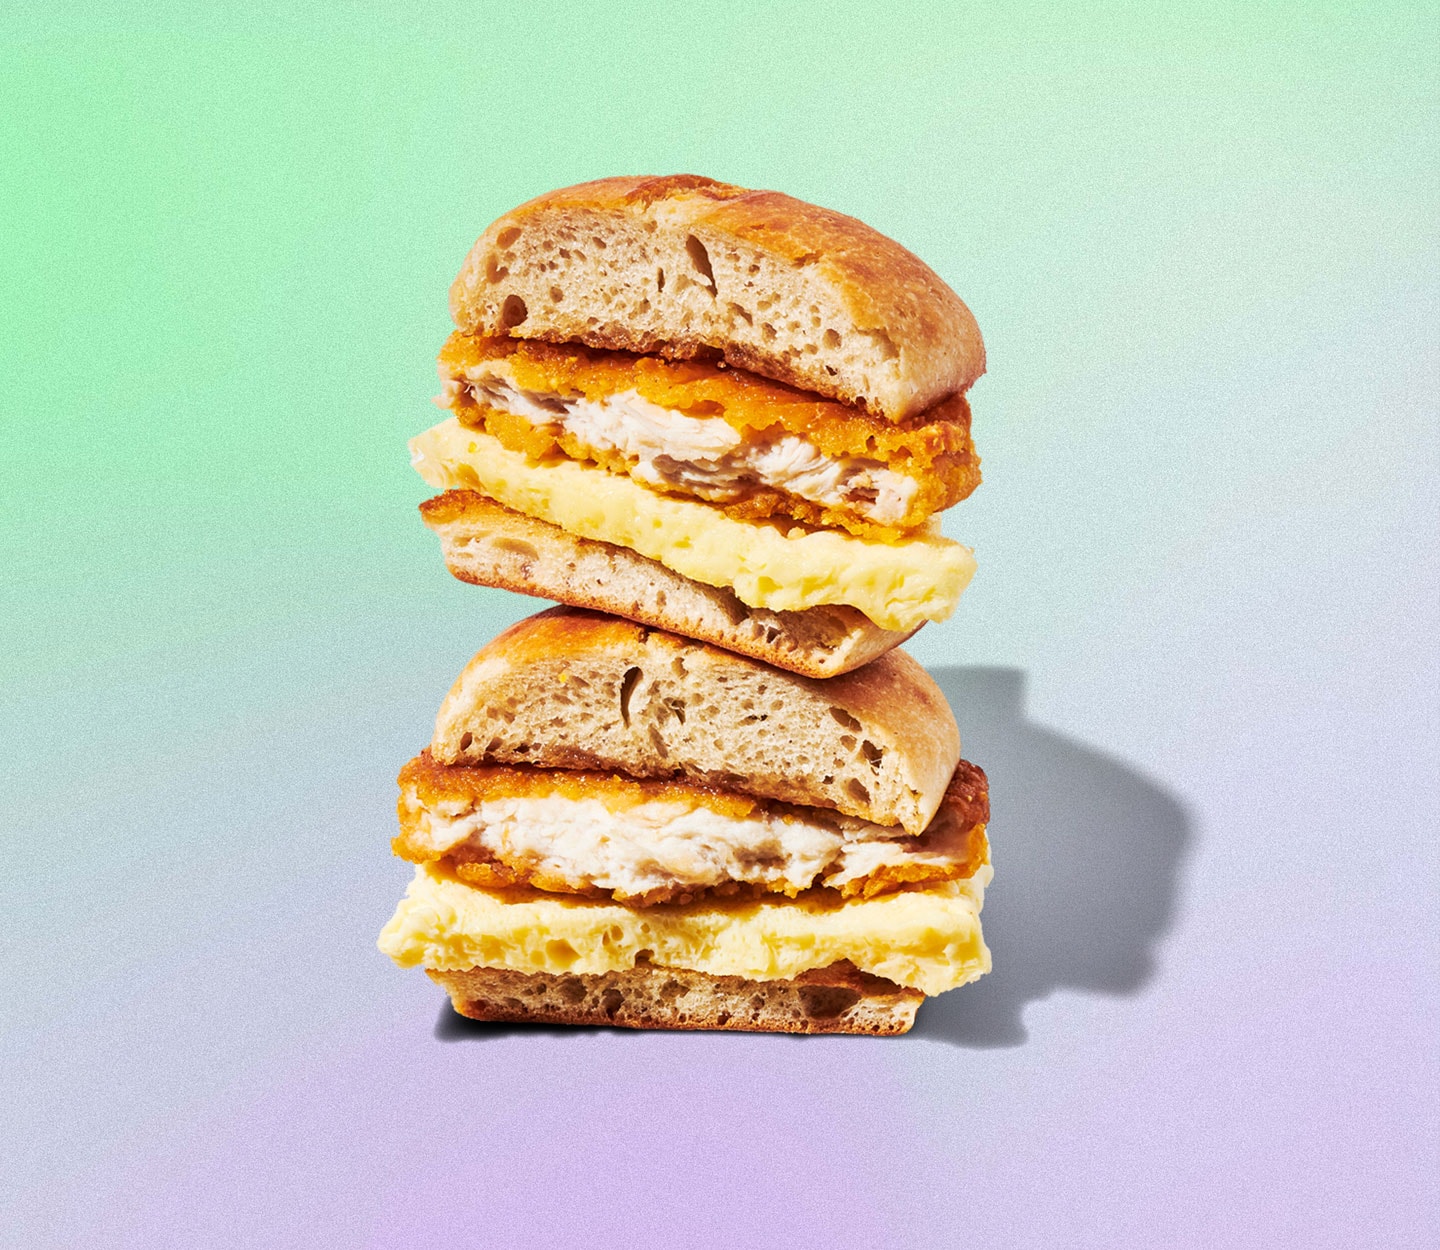 A Starbucks Chicken, Maple Butter & Egg Sandwich that is sliced in half and stacked on a cheerful background.